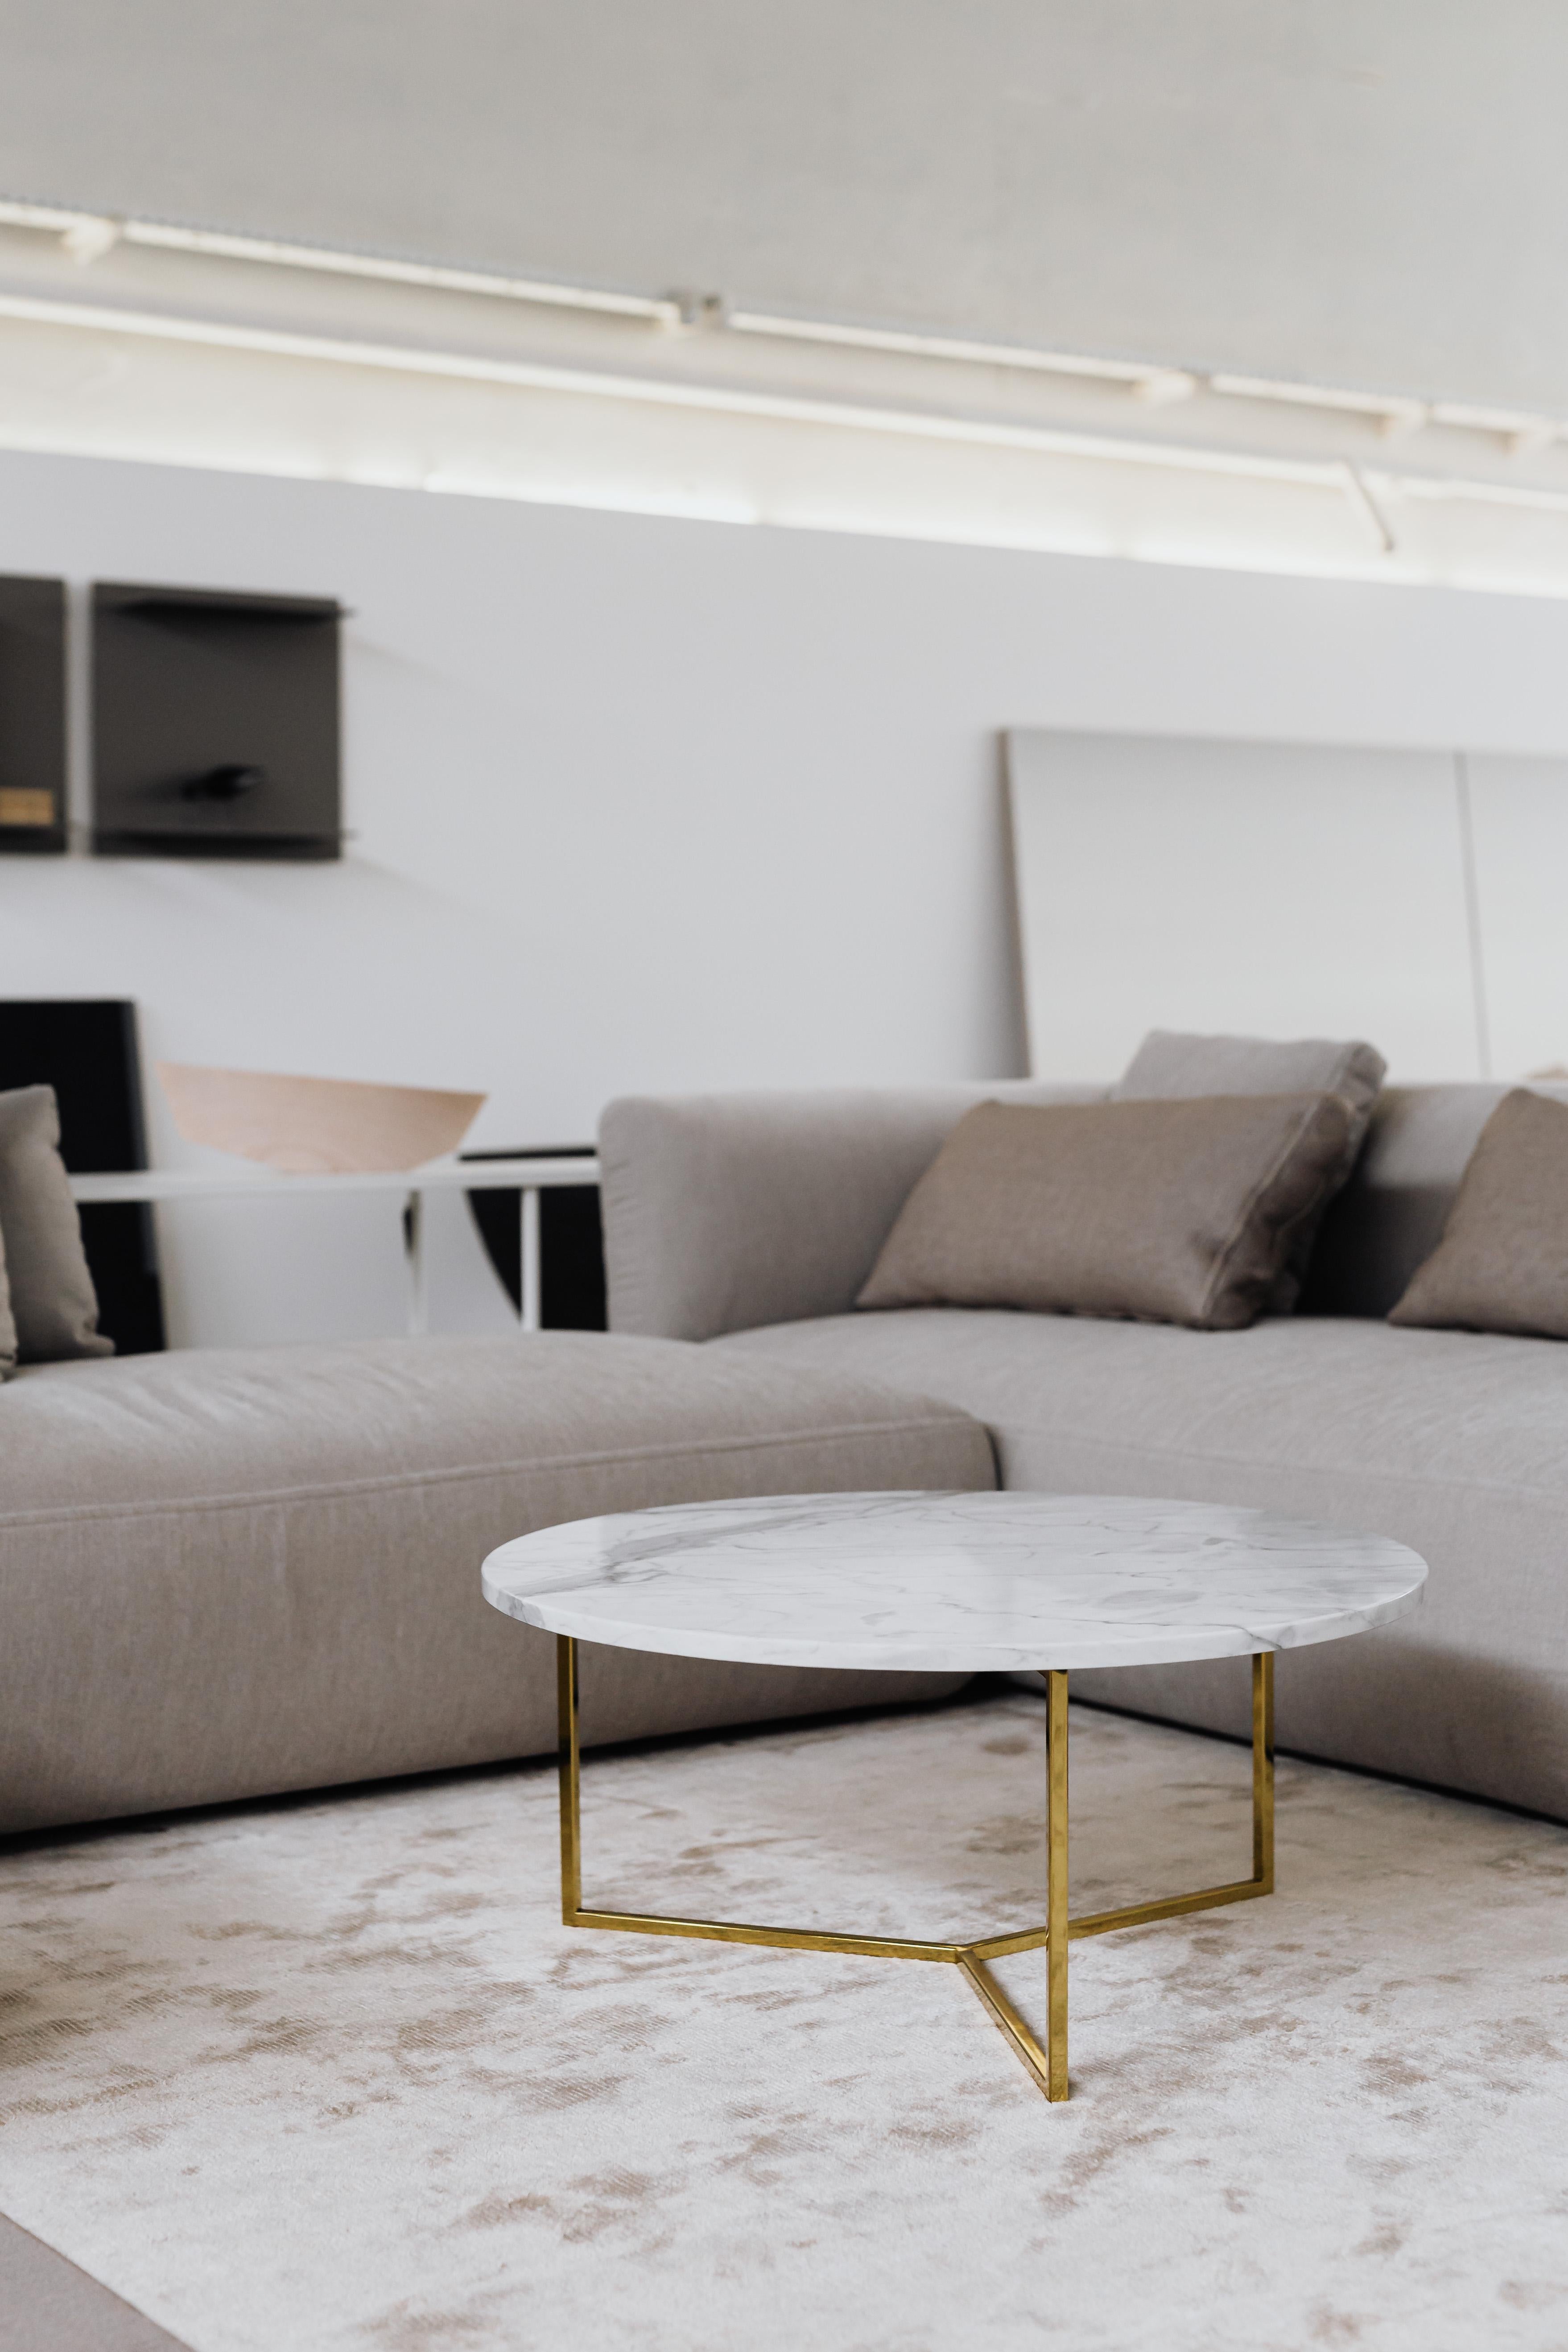 Small white brass oval coffee table by Un’common.
Dimensions: D 70 x H 35 cm.
Materials: marble, brass.

Oval brass is a round coffee bench made of beautiful white Carrara marble or graphite Port Laurent with a beautiful veining and brassed